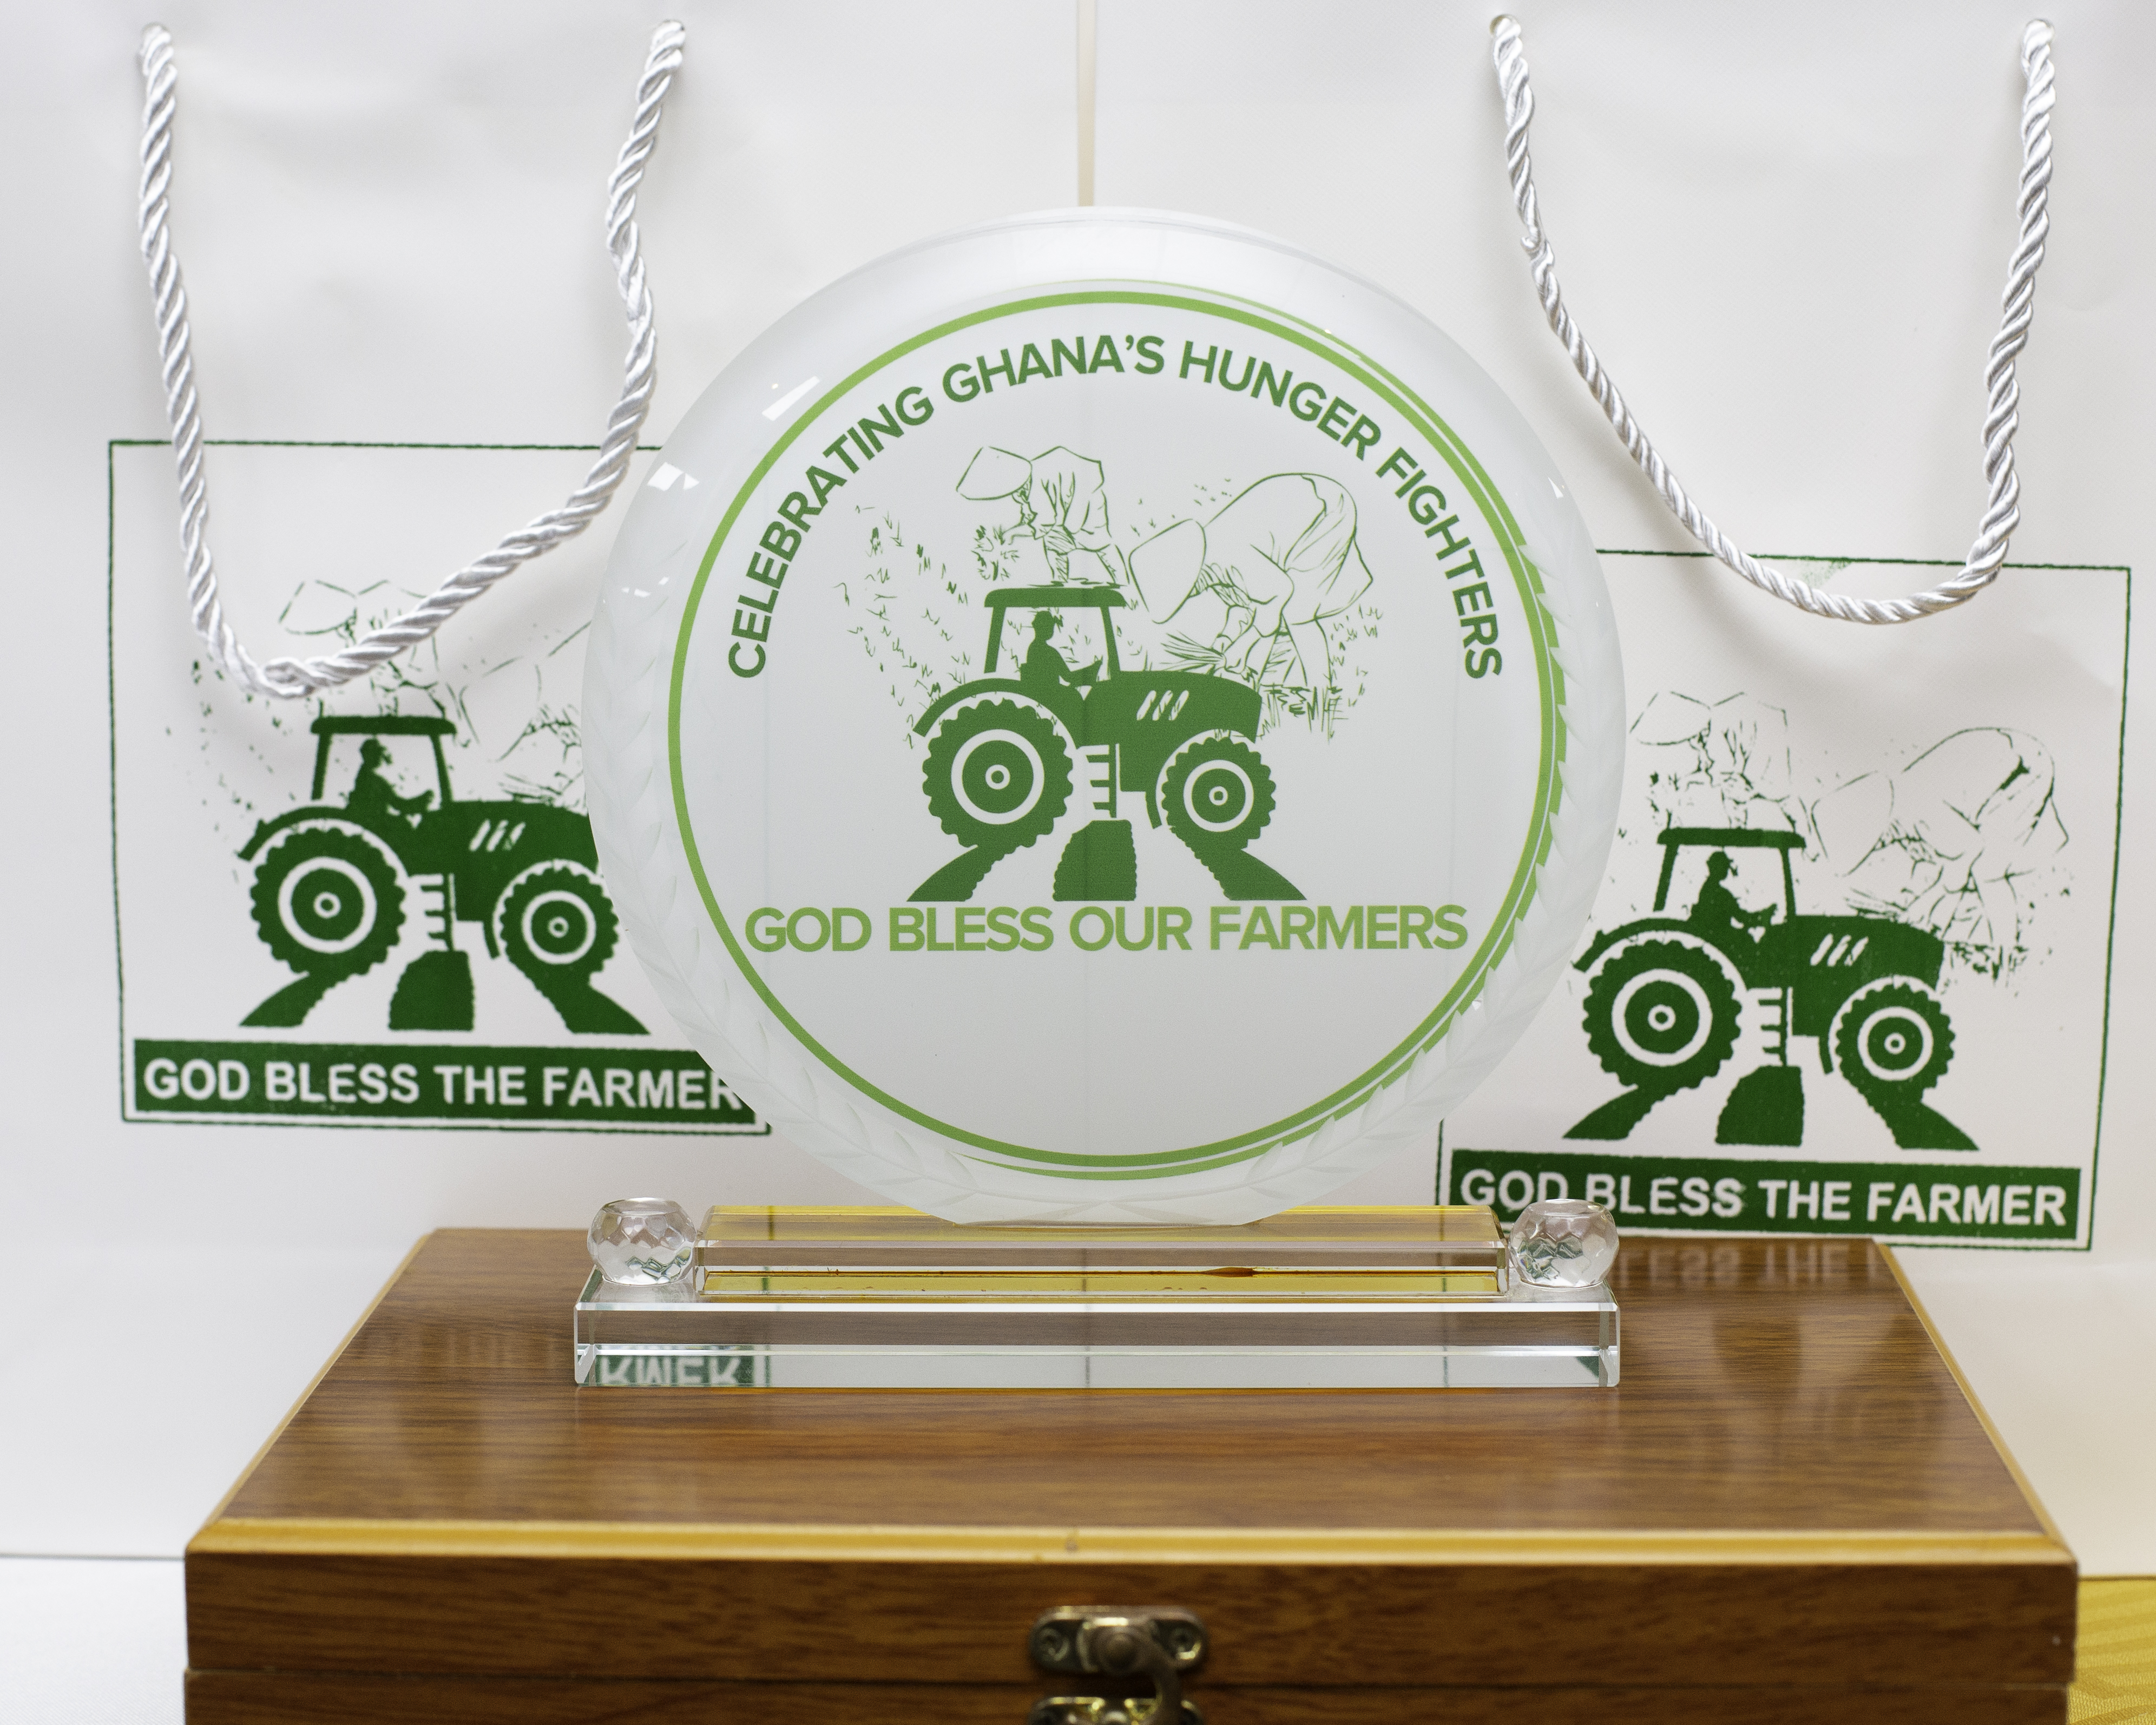 one of the plaques giften to a farmer